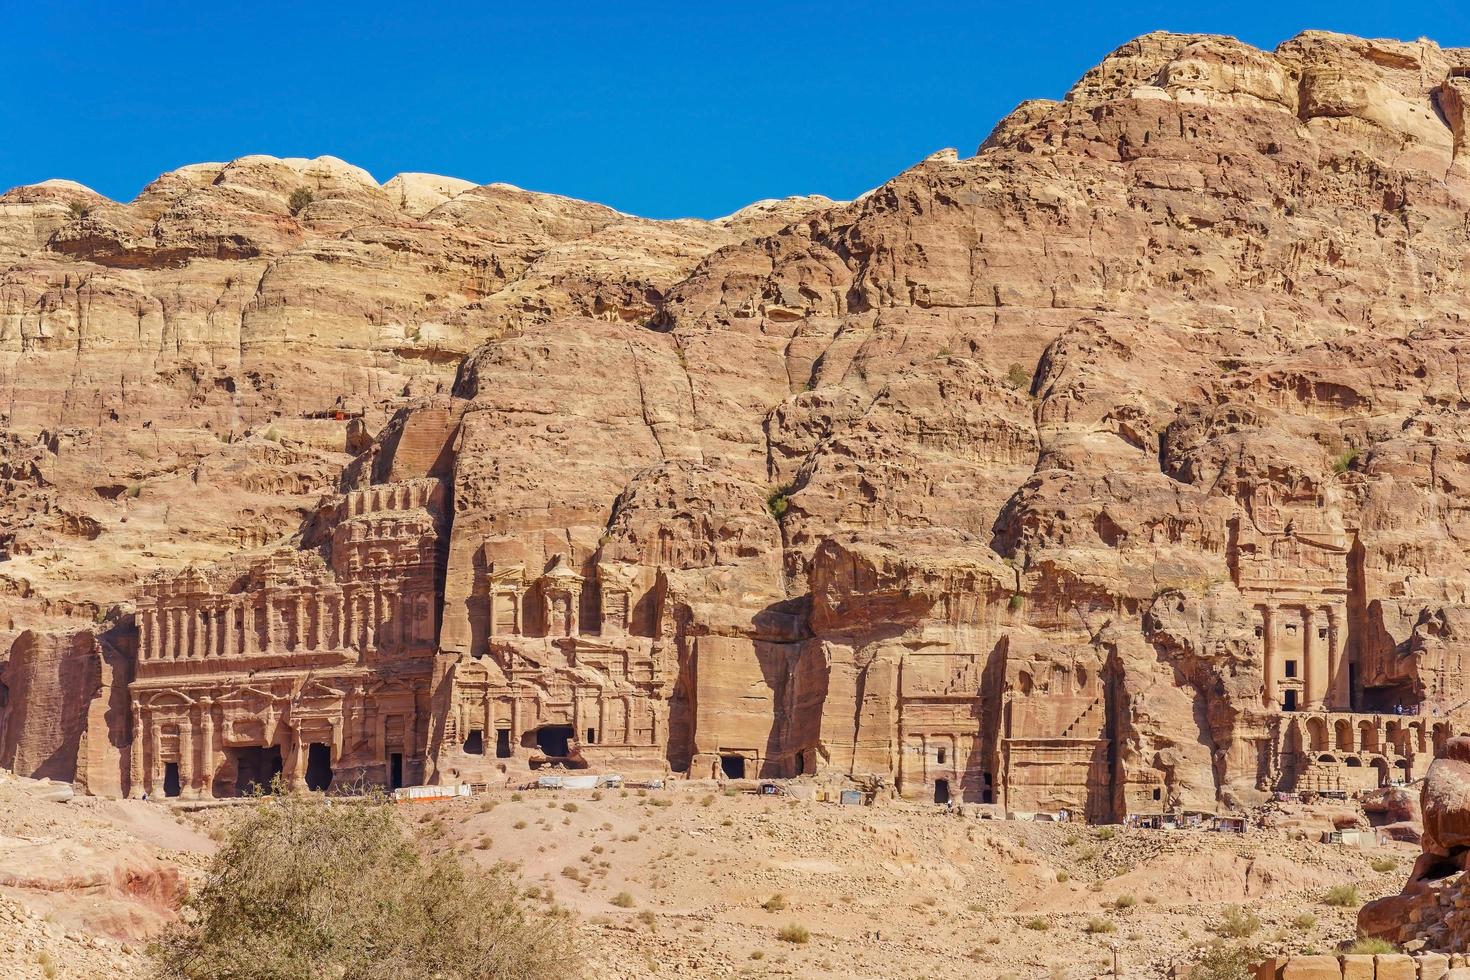 A view from The Royal Tombs in Petra, Jordan. photo